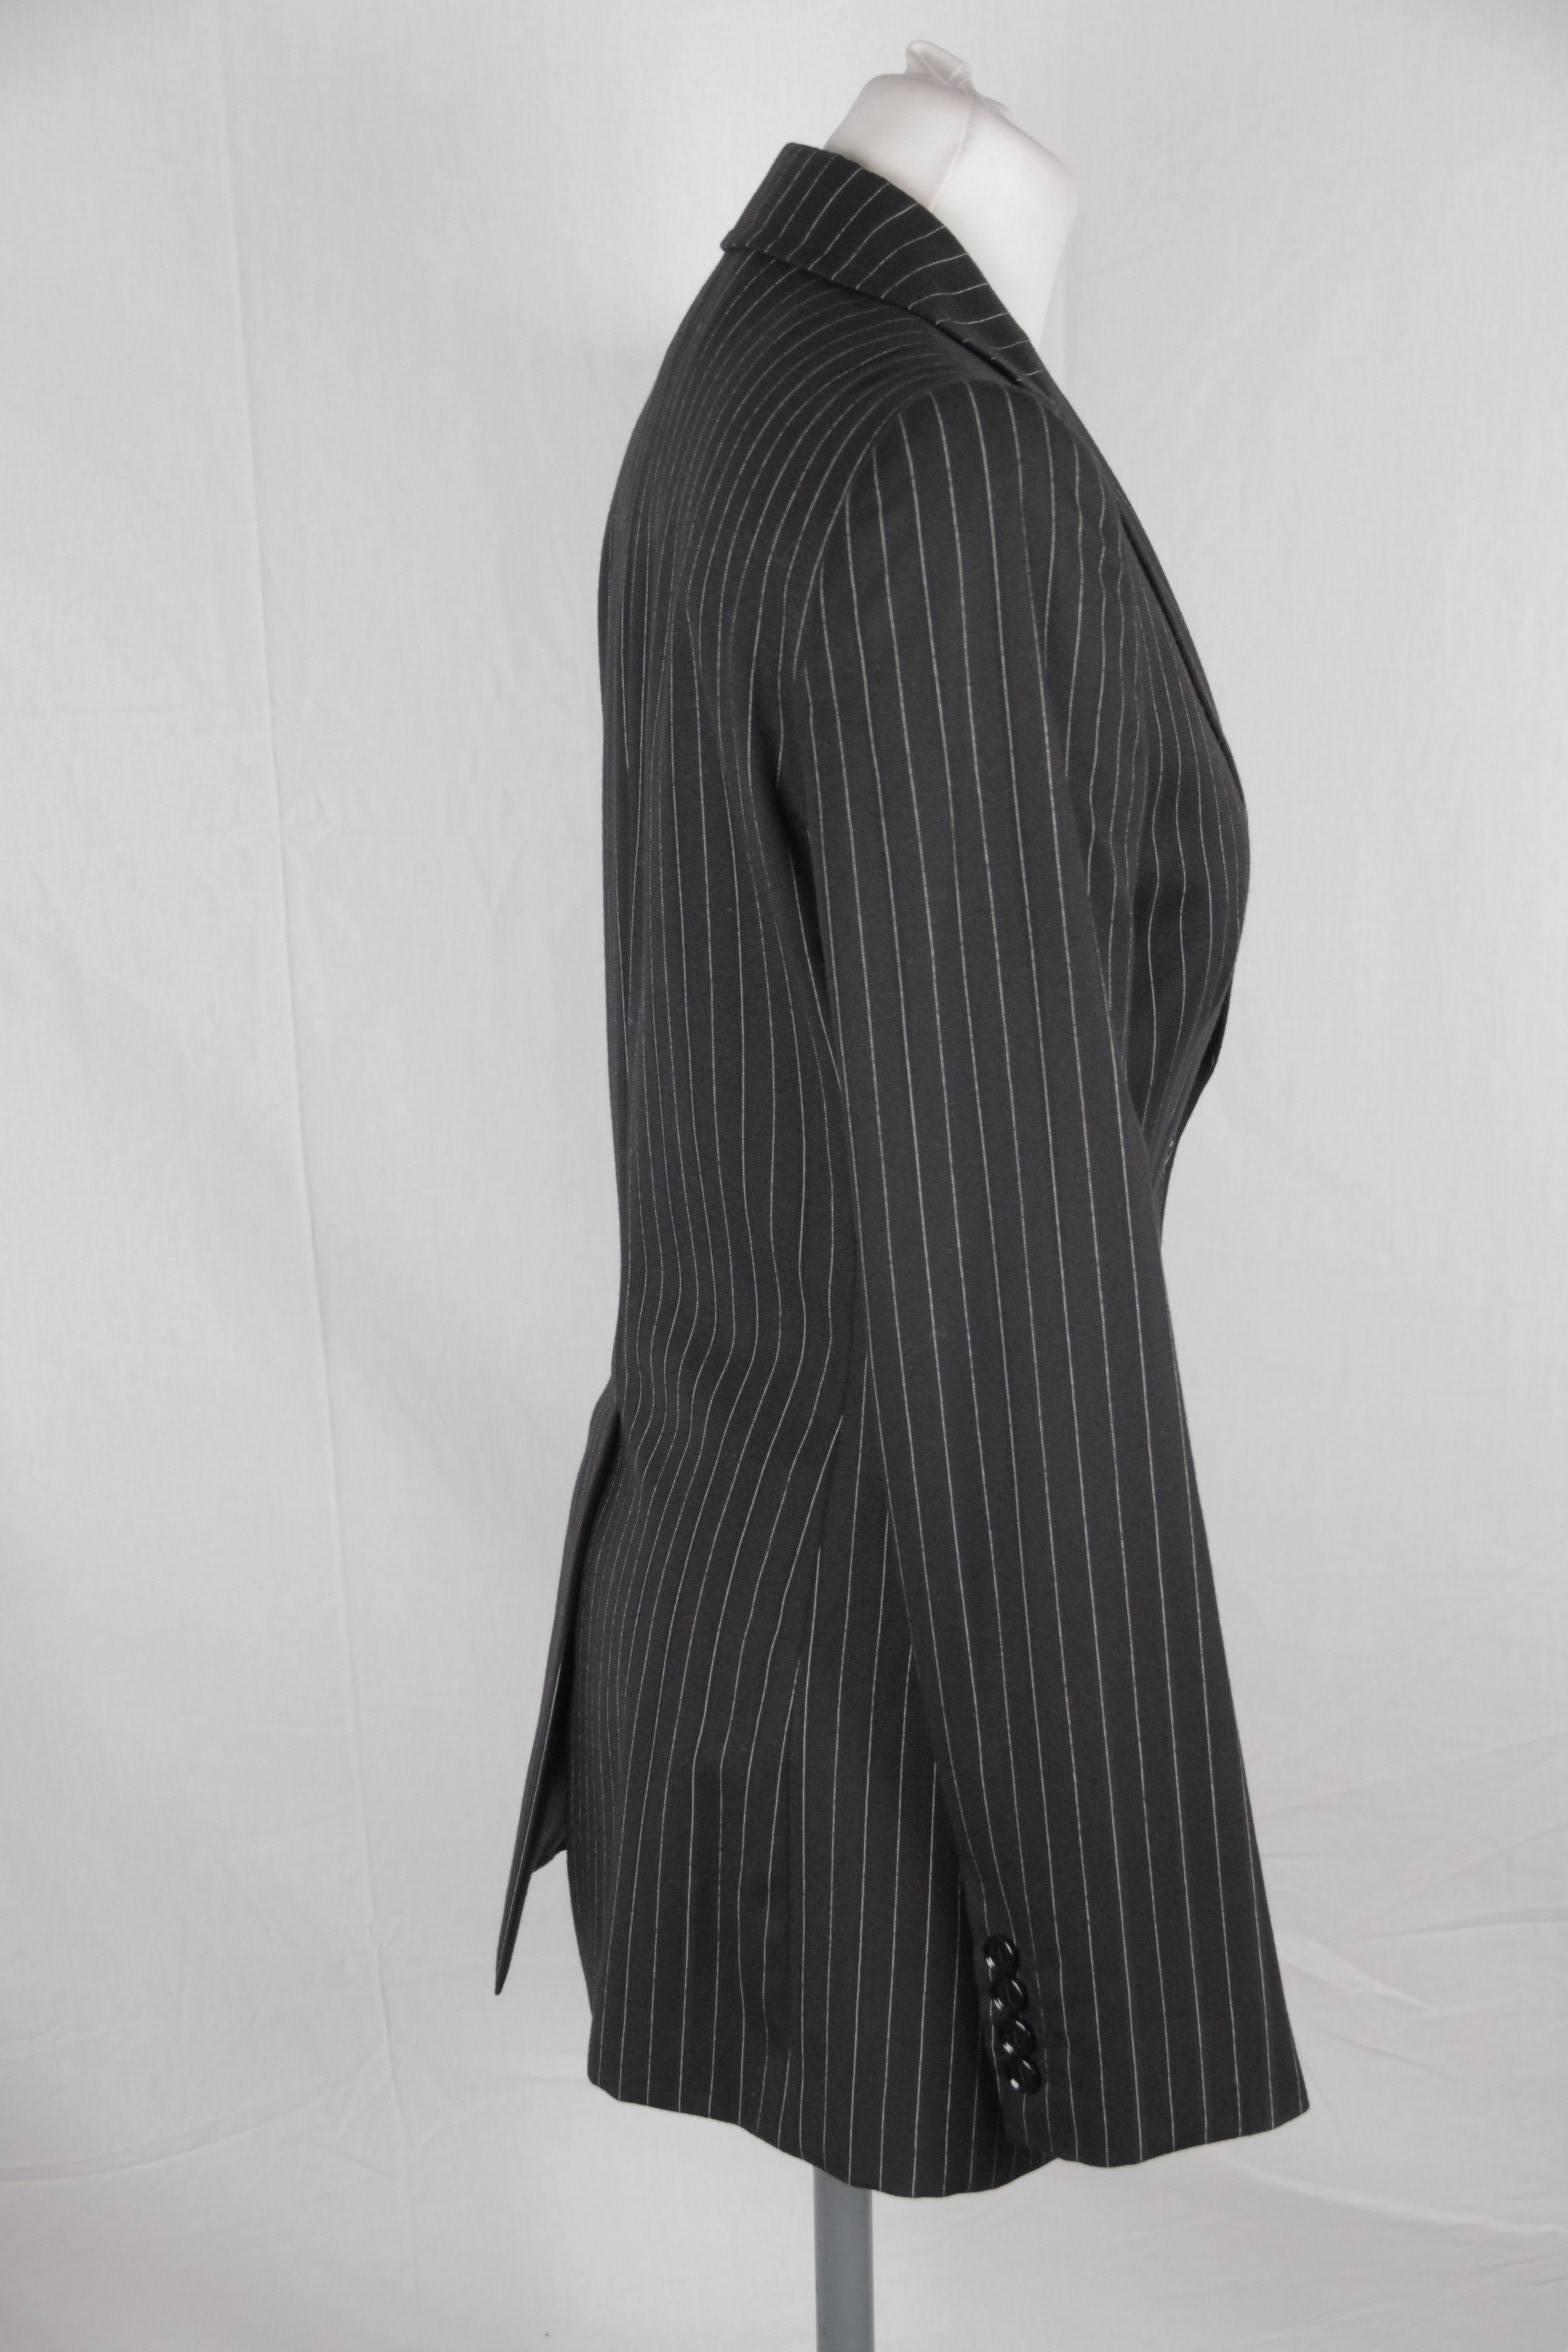 DOLCE & GABBANA Black PinStriped Wool SUIT Blazer & Trousers Set SIZE 40 In Good Condition In Rome, Rome